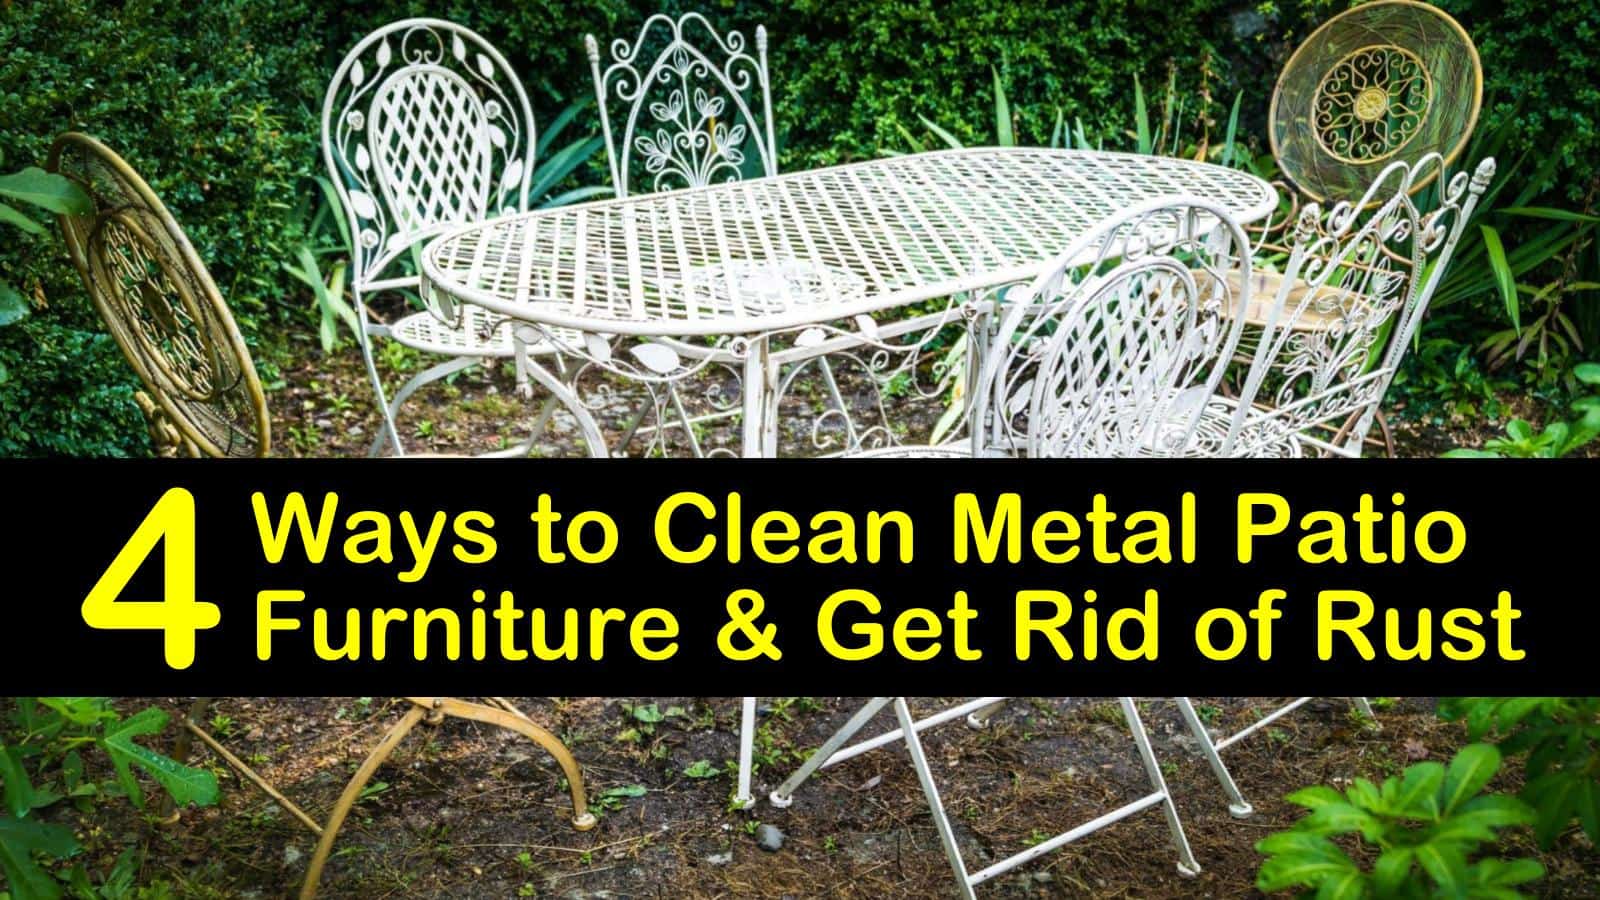 4 Ways To Clean Metal Patio Furniture, How To Remove Rust From Powder Coated Patio Furniture